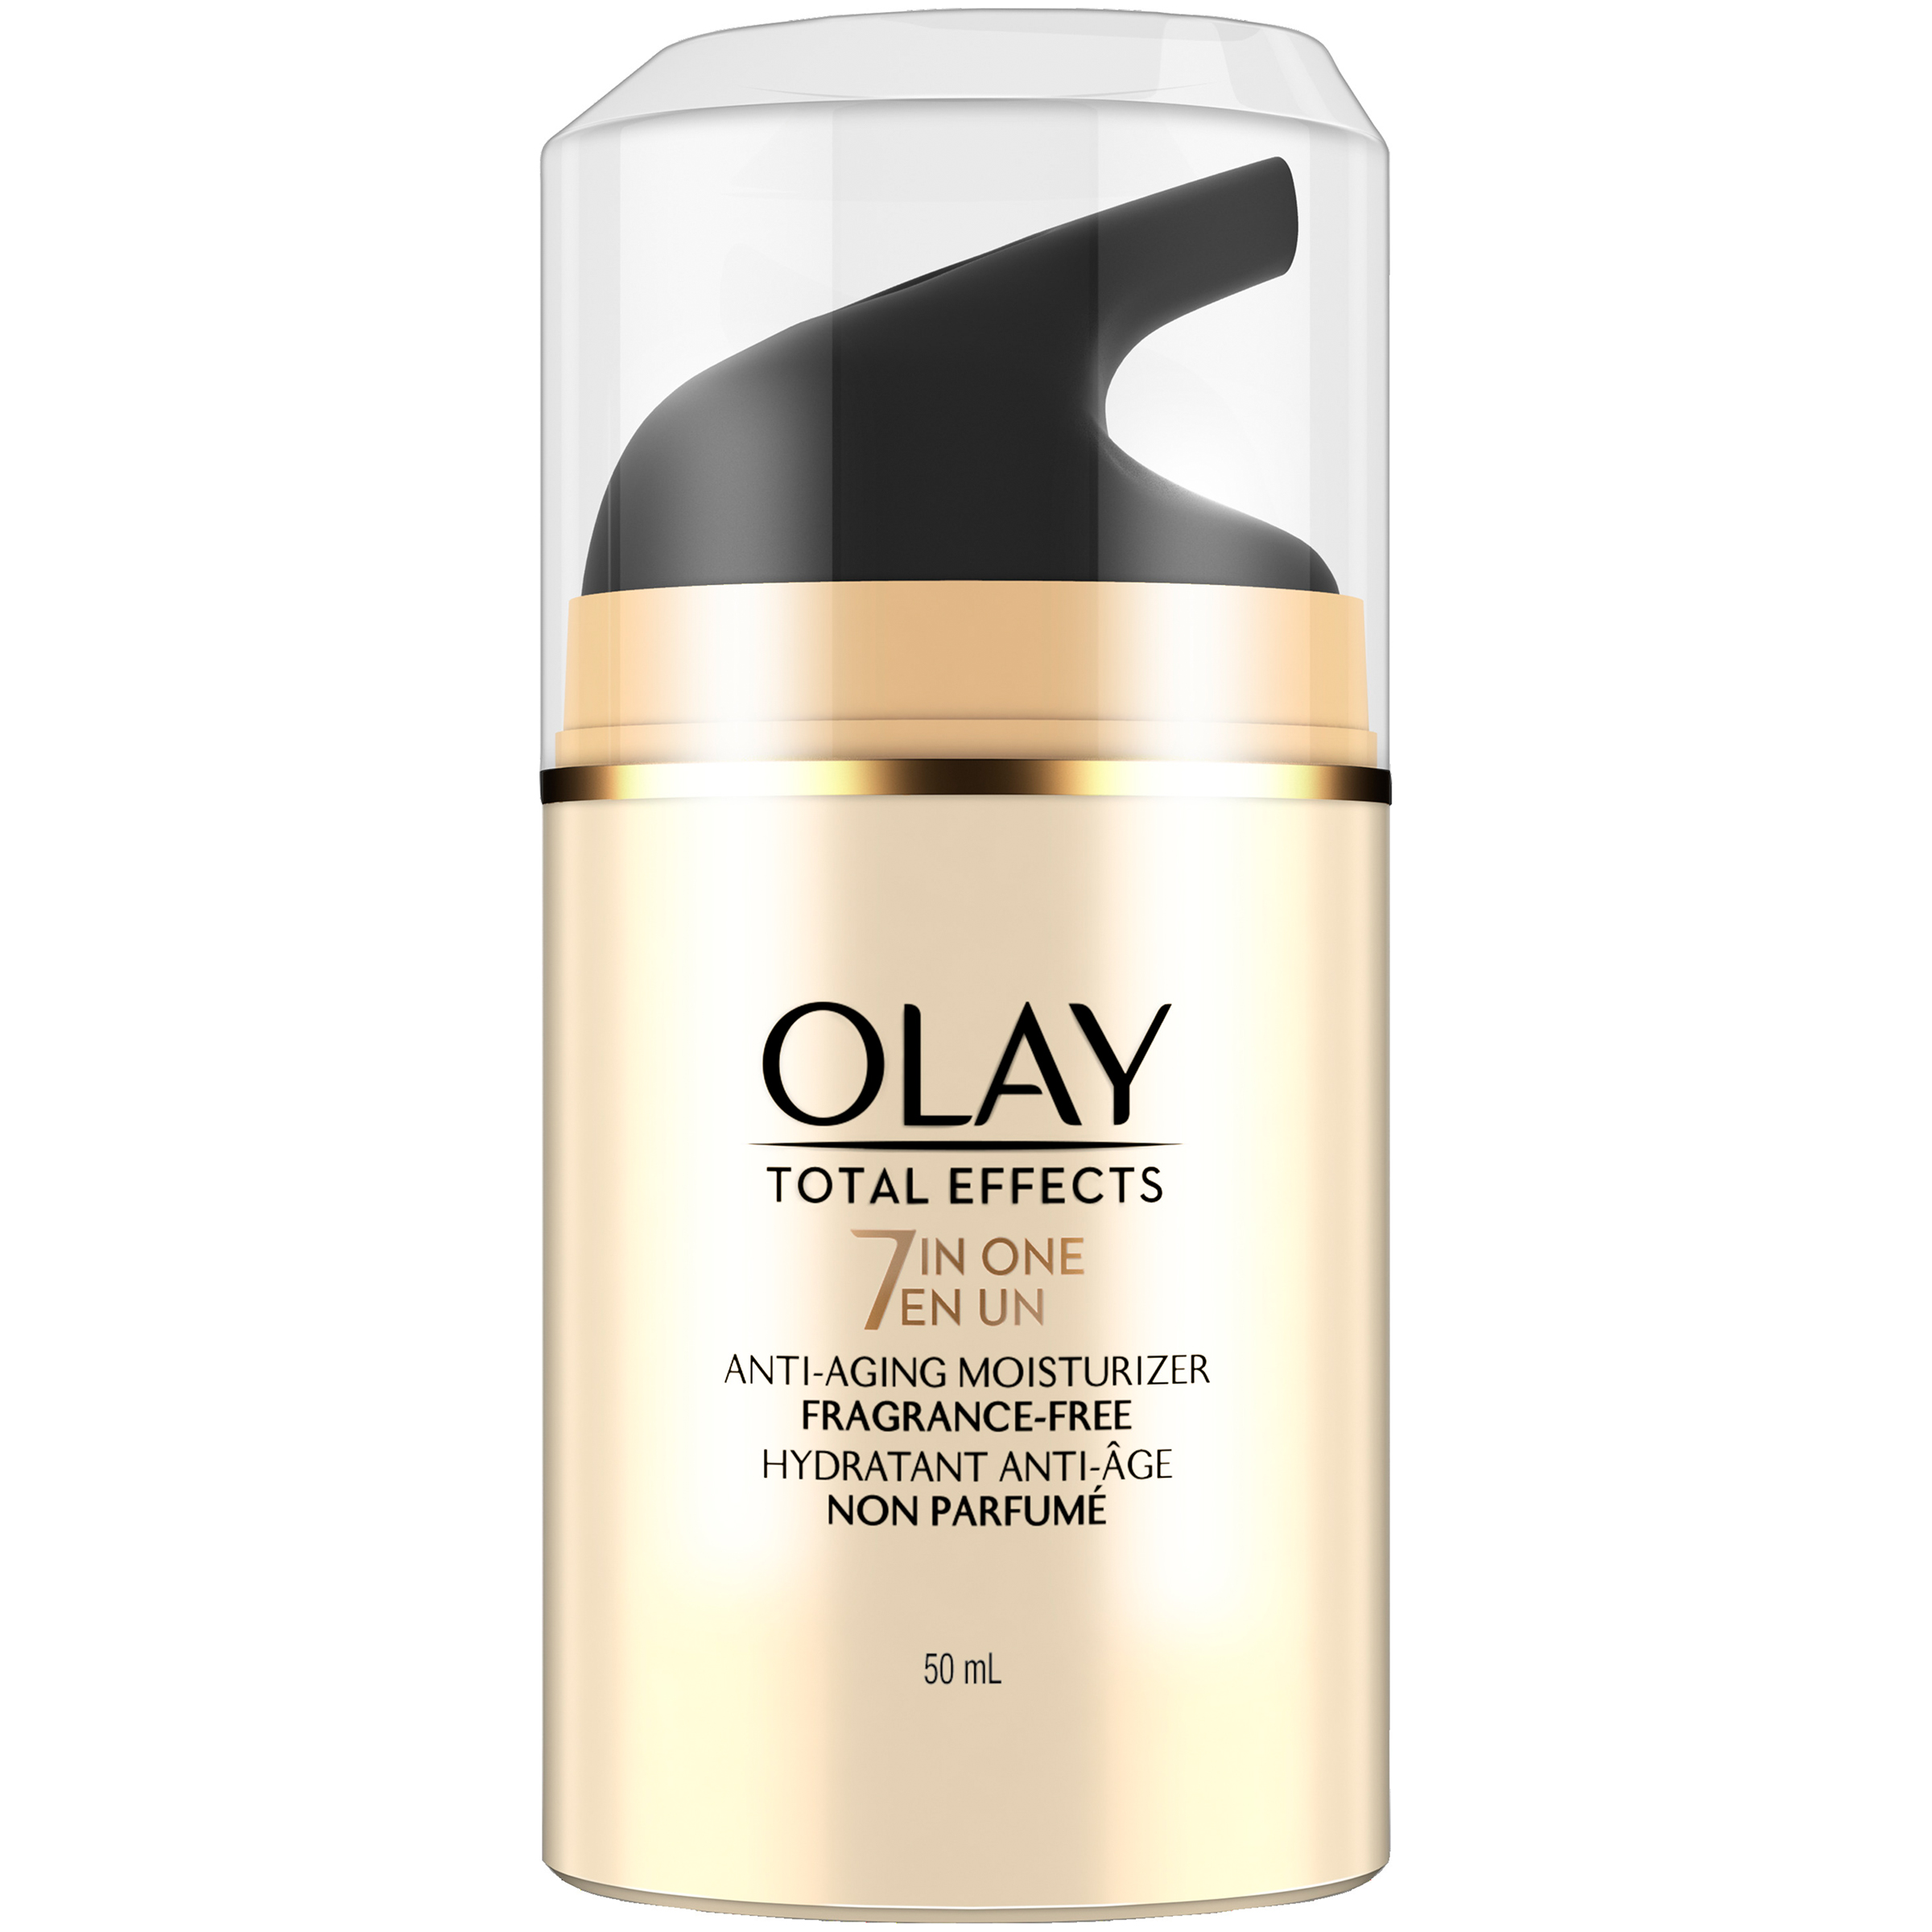 olay-total-effects-anti-aging-face-moisturizer-fragrance-free-1-7-fl